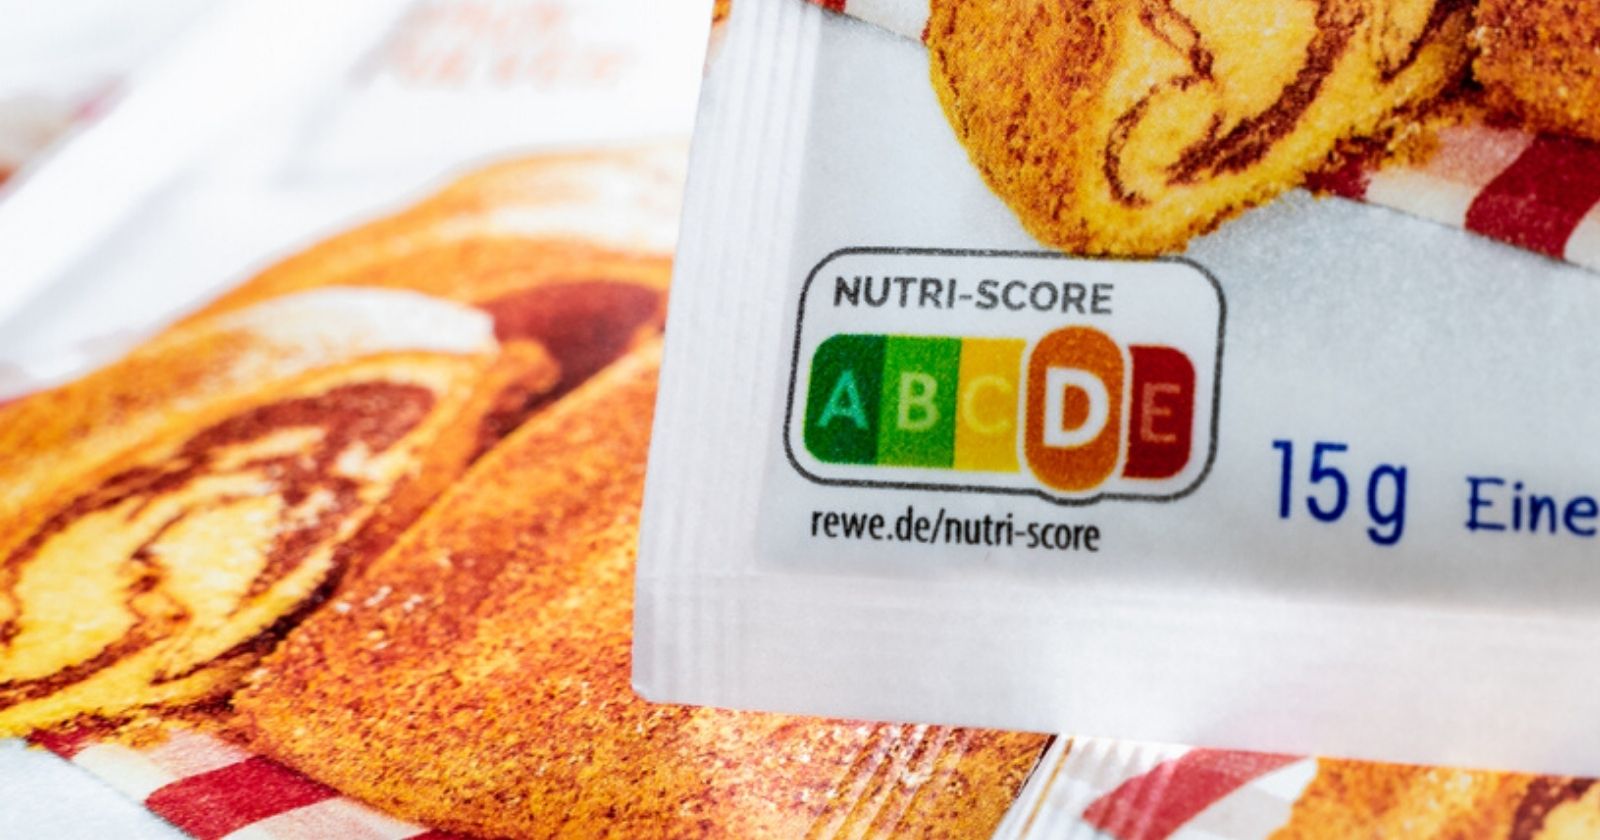 Nutri-Score: "Only processed products are entitled to their green note, here's the scam"